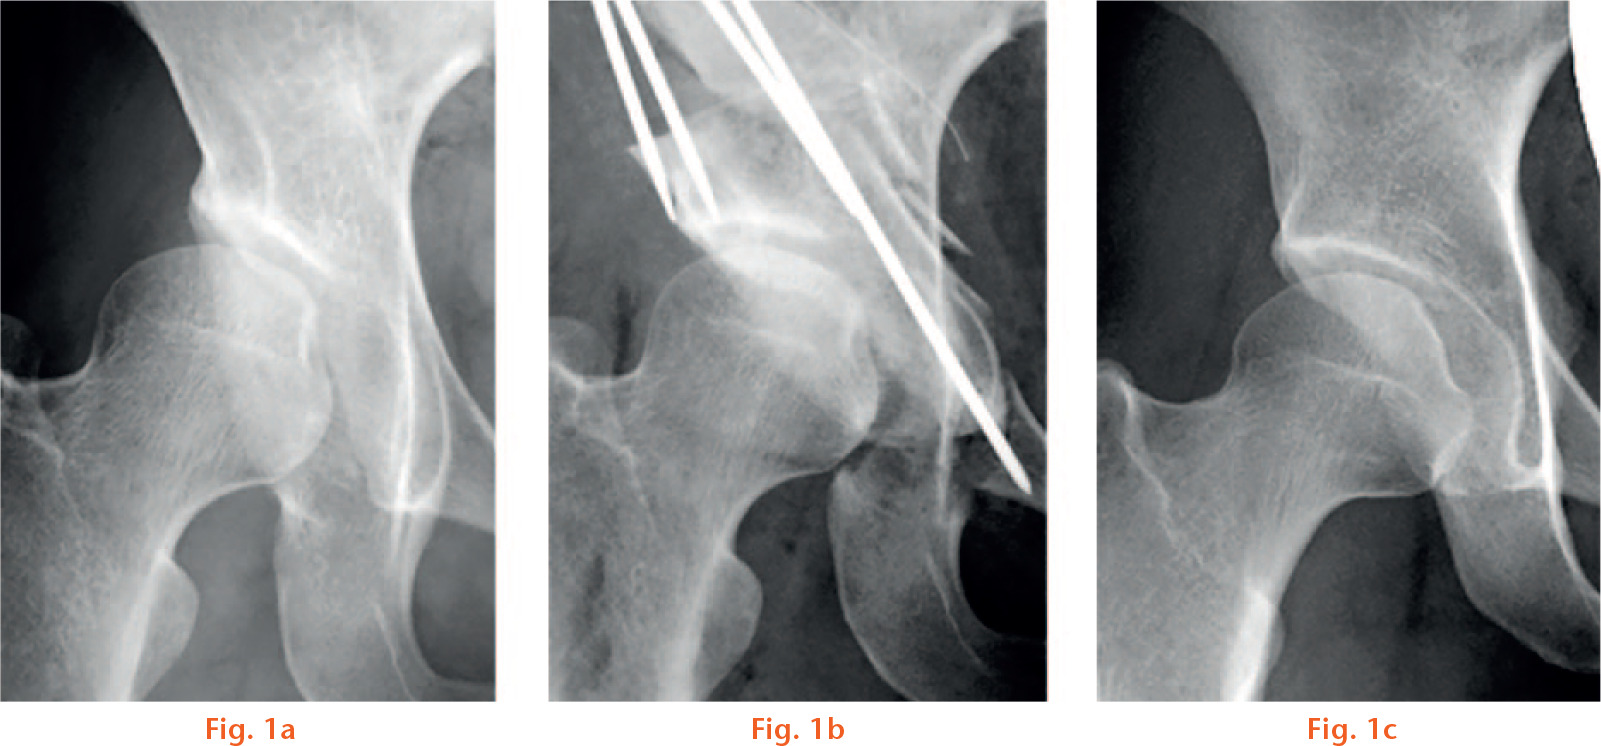  
            Anteroposterior radiographs of acetabular dysplasia (AD) pre- and post-operatively, and a control hip: a) case 61: AD hip of a 42-year-old female; Sharp angle 56.3°; centre-edge (CE) angle 3.5°; acetabular roof obliquity (ARO) angle 29.6°; minimum joint space width (MJSW) 3.7 mm; developmental dyaplasia of the hip, positive; b) case 61: post-periacetabular osteotomy; c) control 26: normal hip of a 30-year-old female; Sharp angle 38.6°; CE angle 28.8°; ARO angle 9.9°; MJSW 3.3 mm.
          